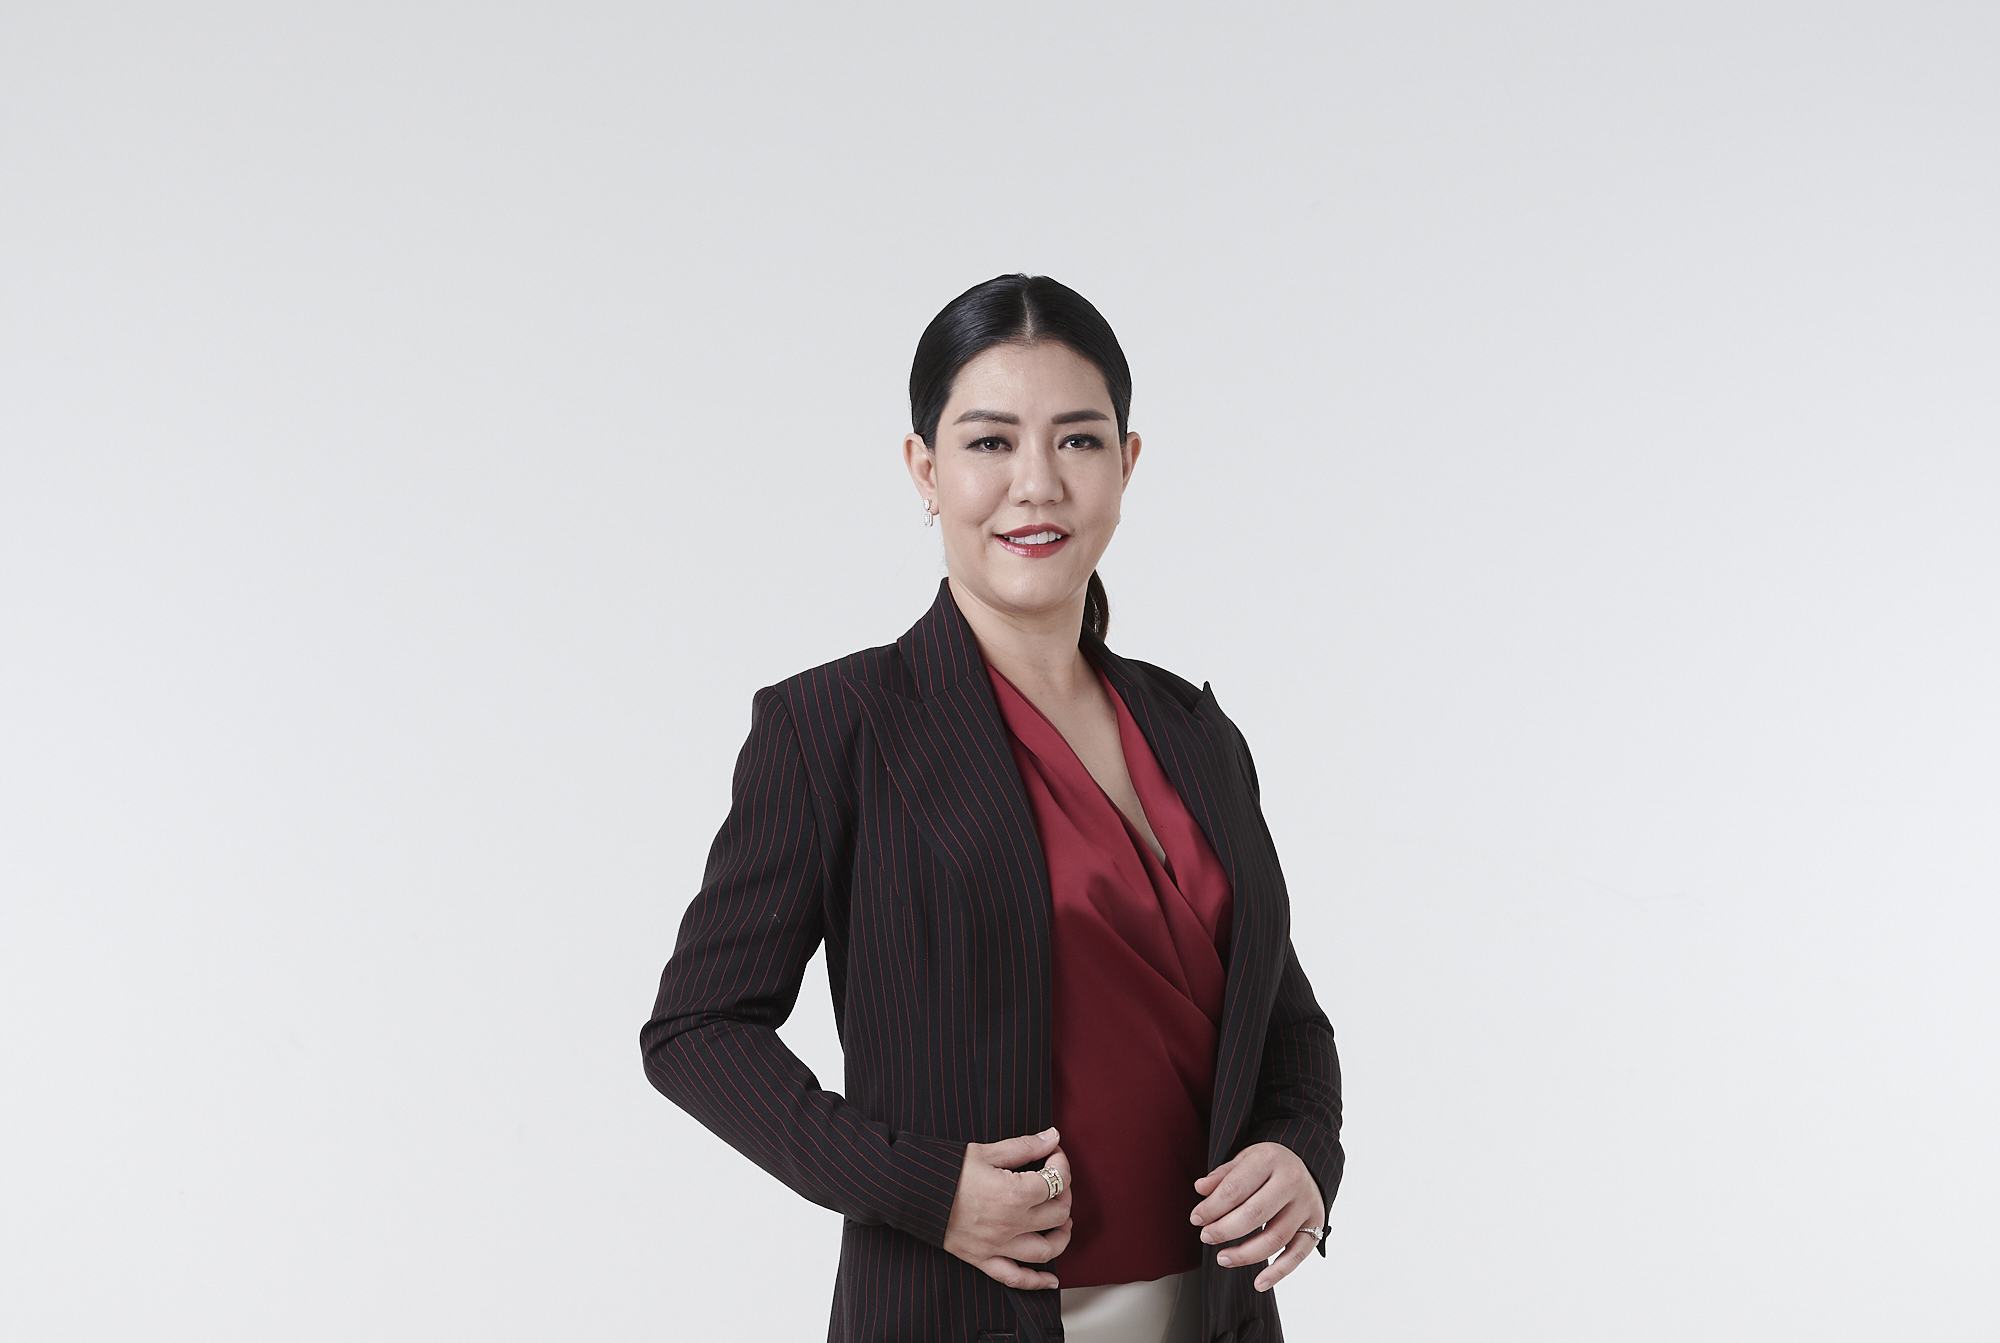 Assistant Professor Chayanna Siripirom. Chief Executive Officer (CEO)